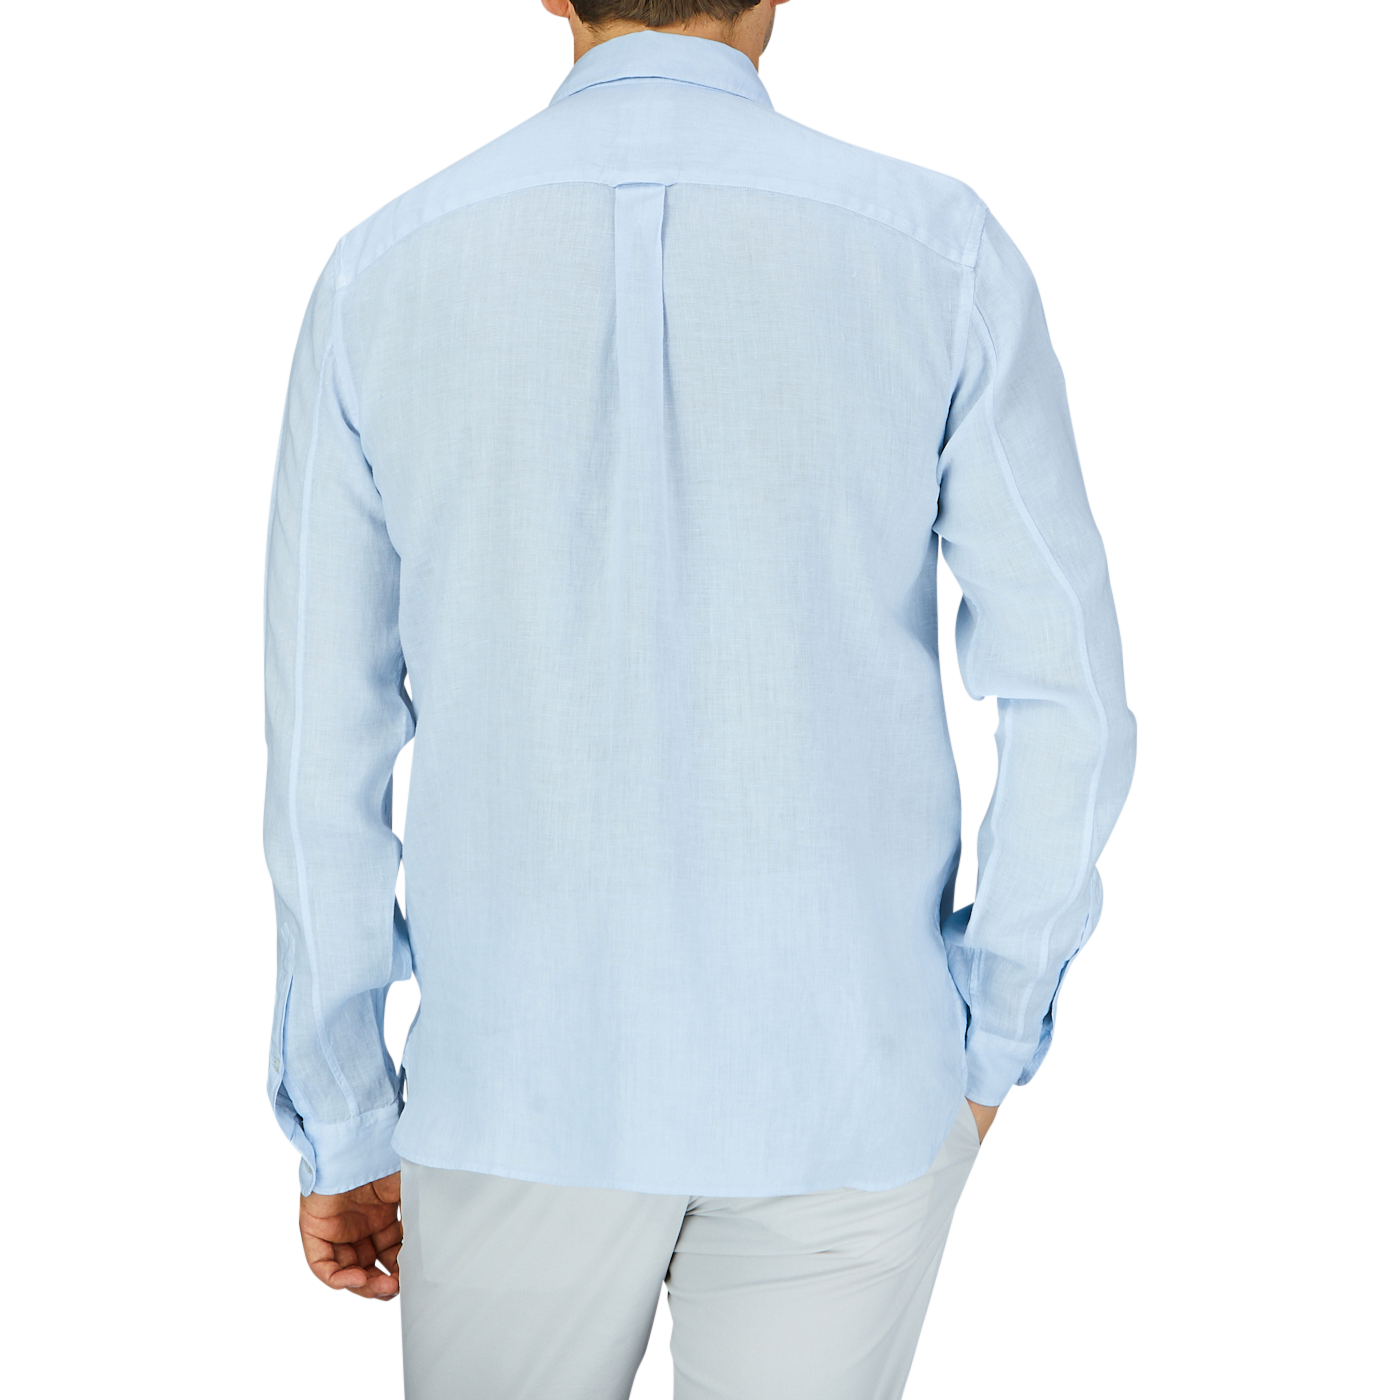 A man standing with his back to the camera wearing a Xacus Light Blue Washed Linen Legacy Shirt and light-colored pants.